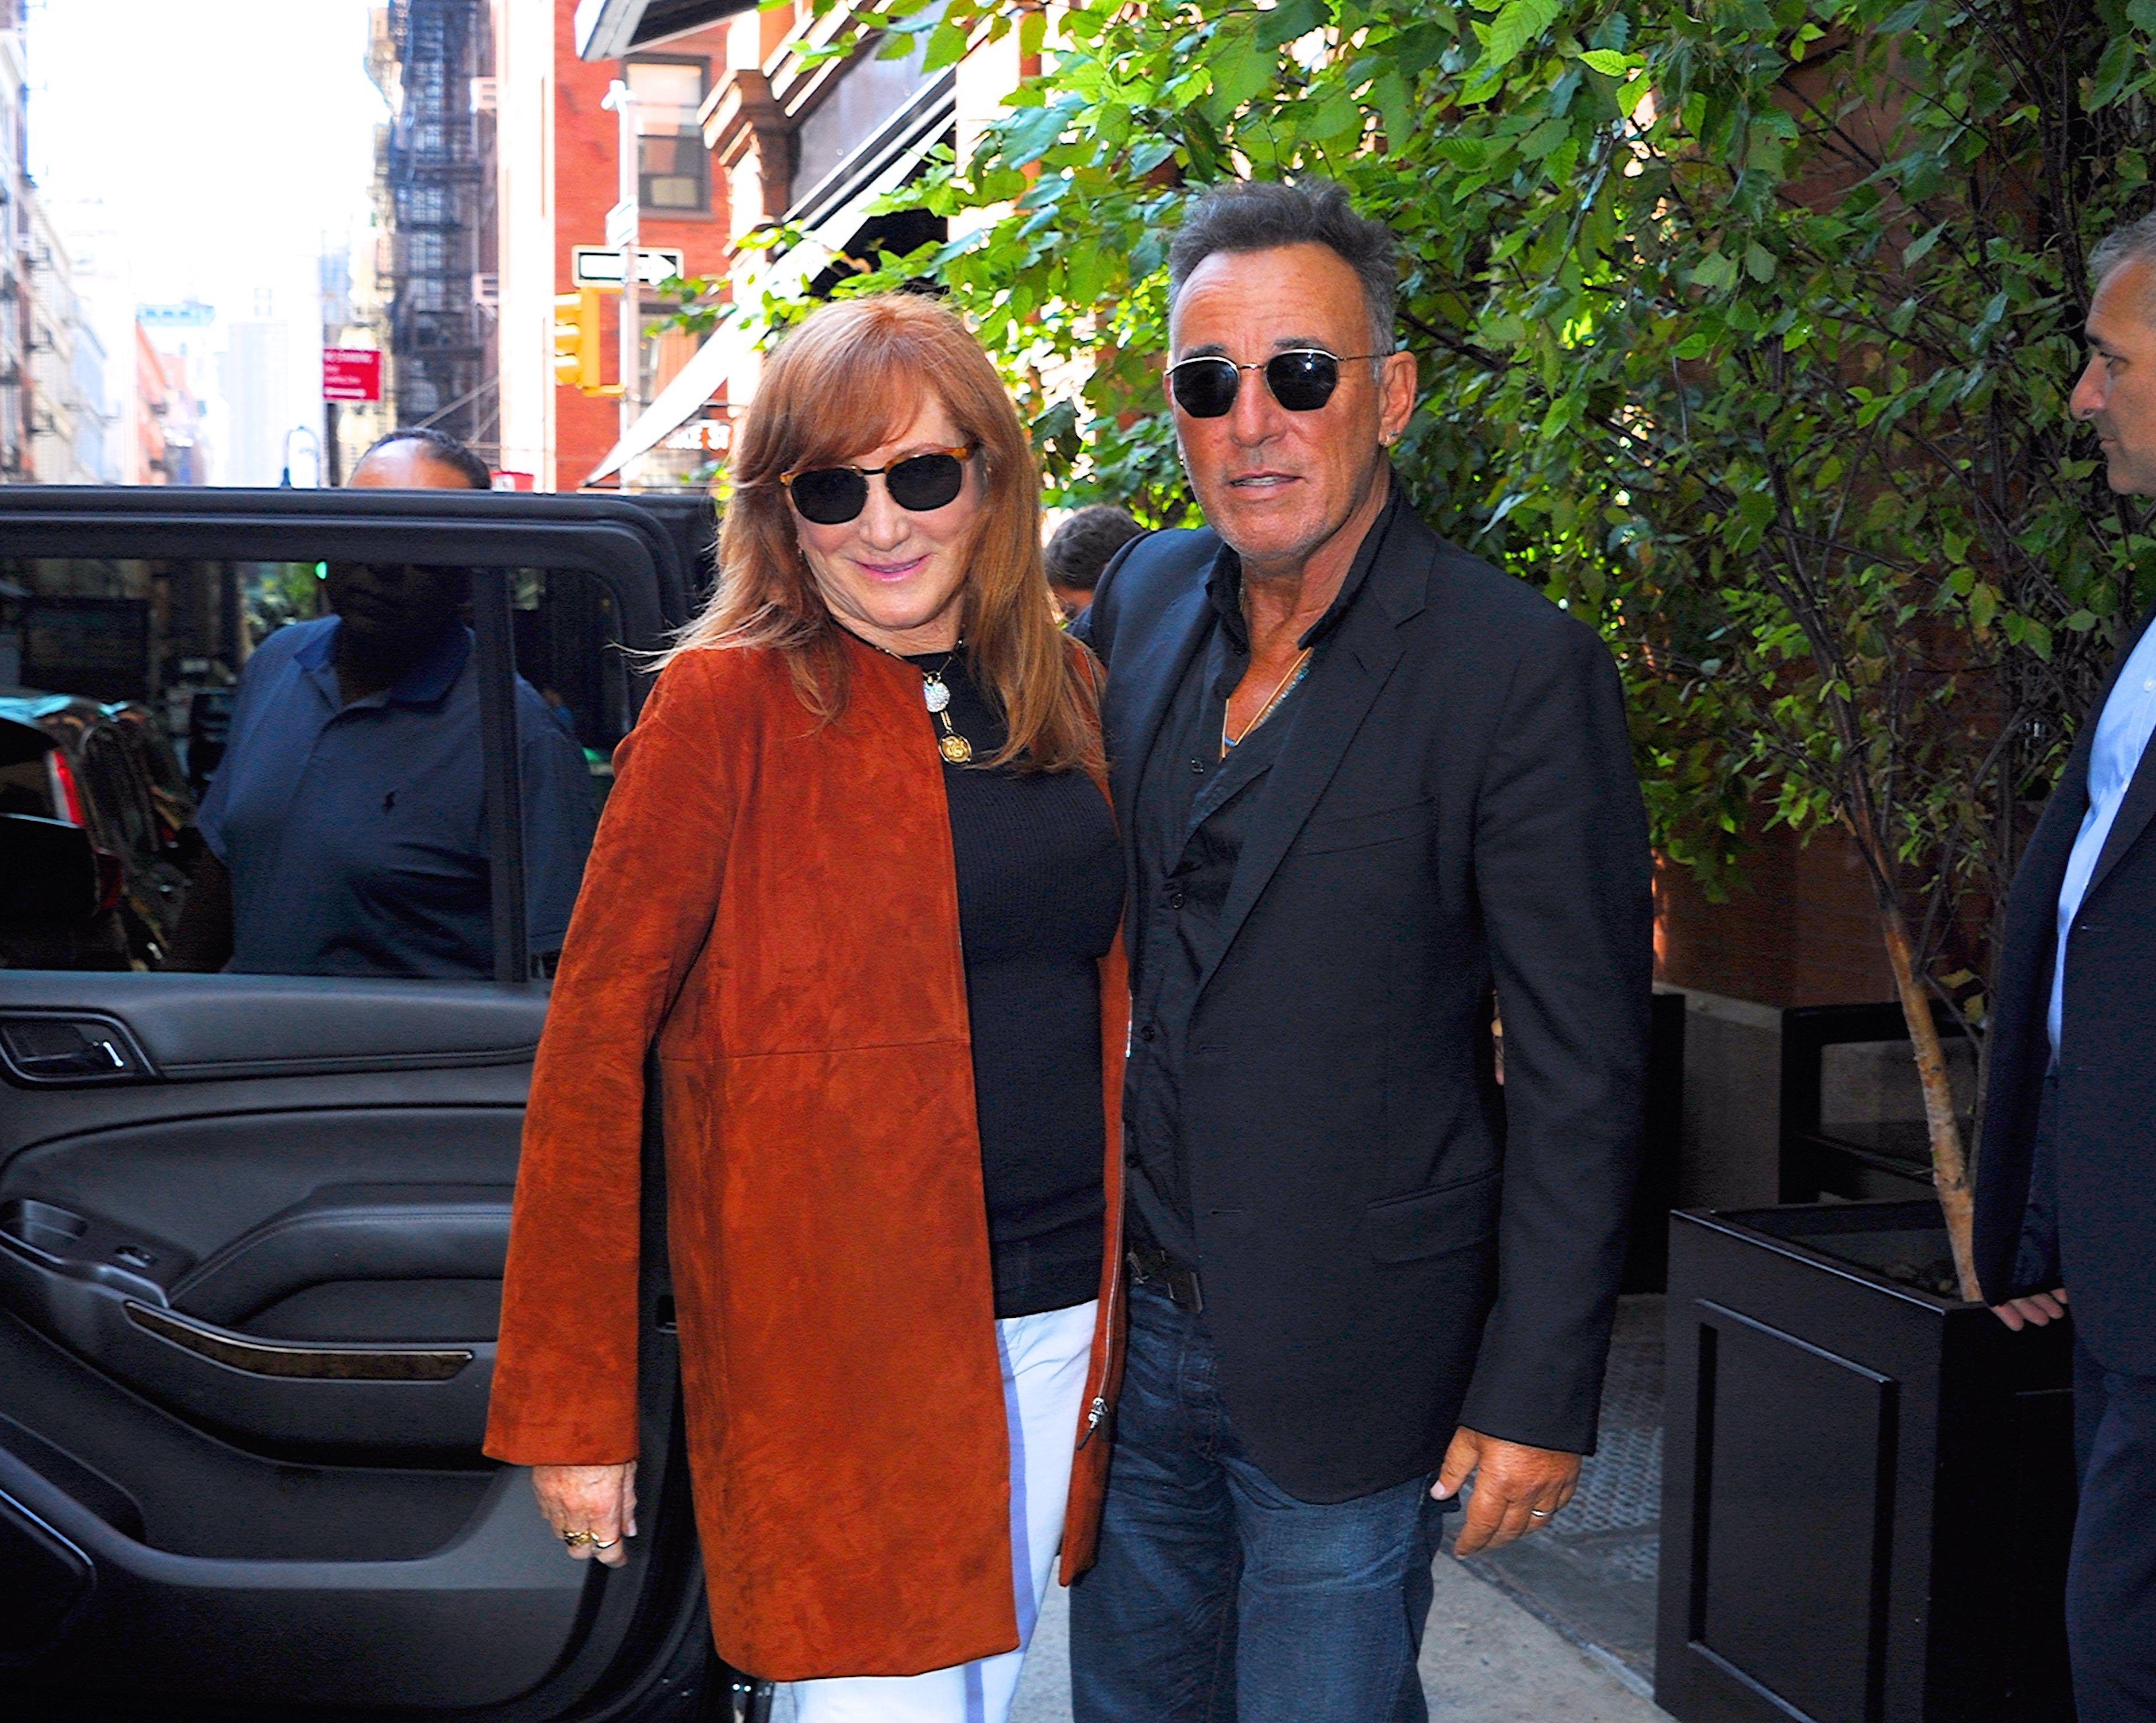 Bruce Springsteen and wife Patti Scialfa seen out and about in Manhattan on September 27, 2019 in New York City. | Source: Getty Images